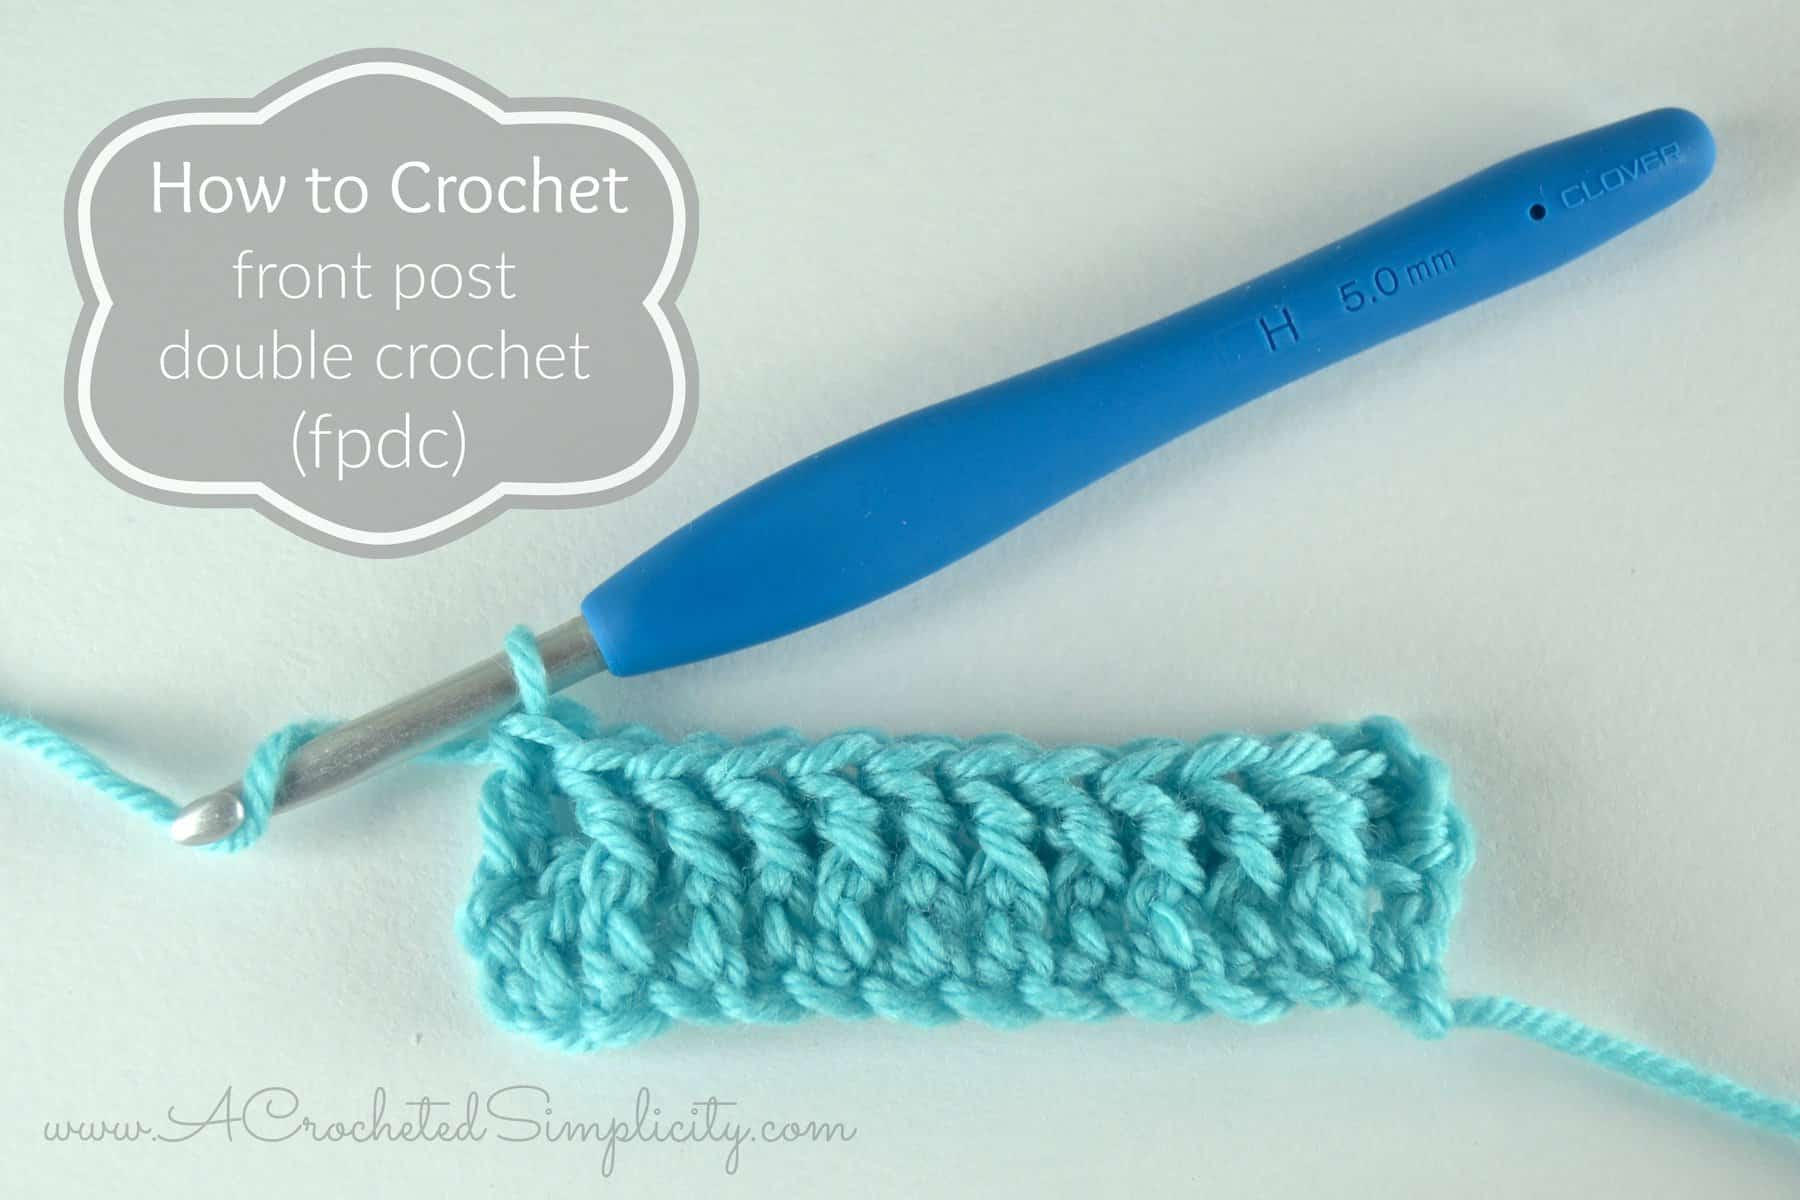 How to Crochet - Front Post Double Crochet (fpdc) (photo & video